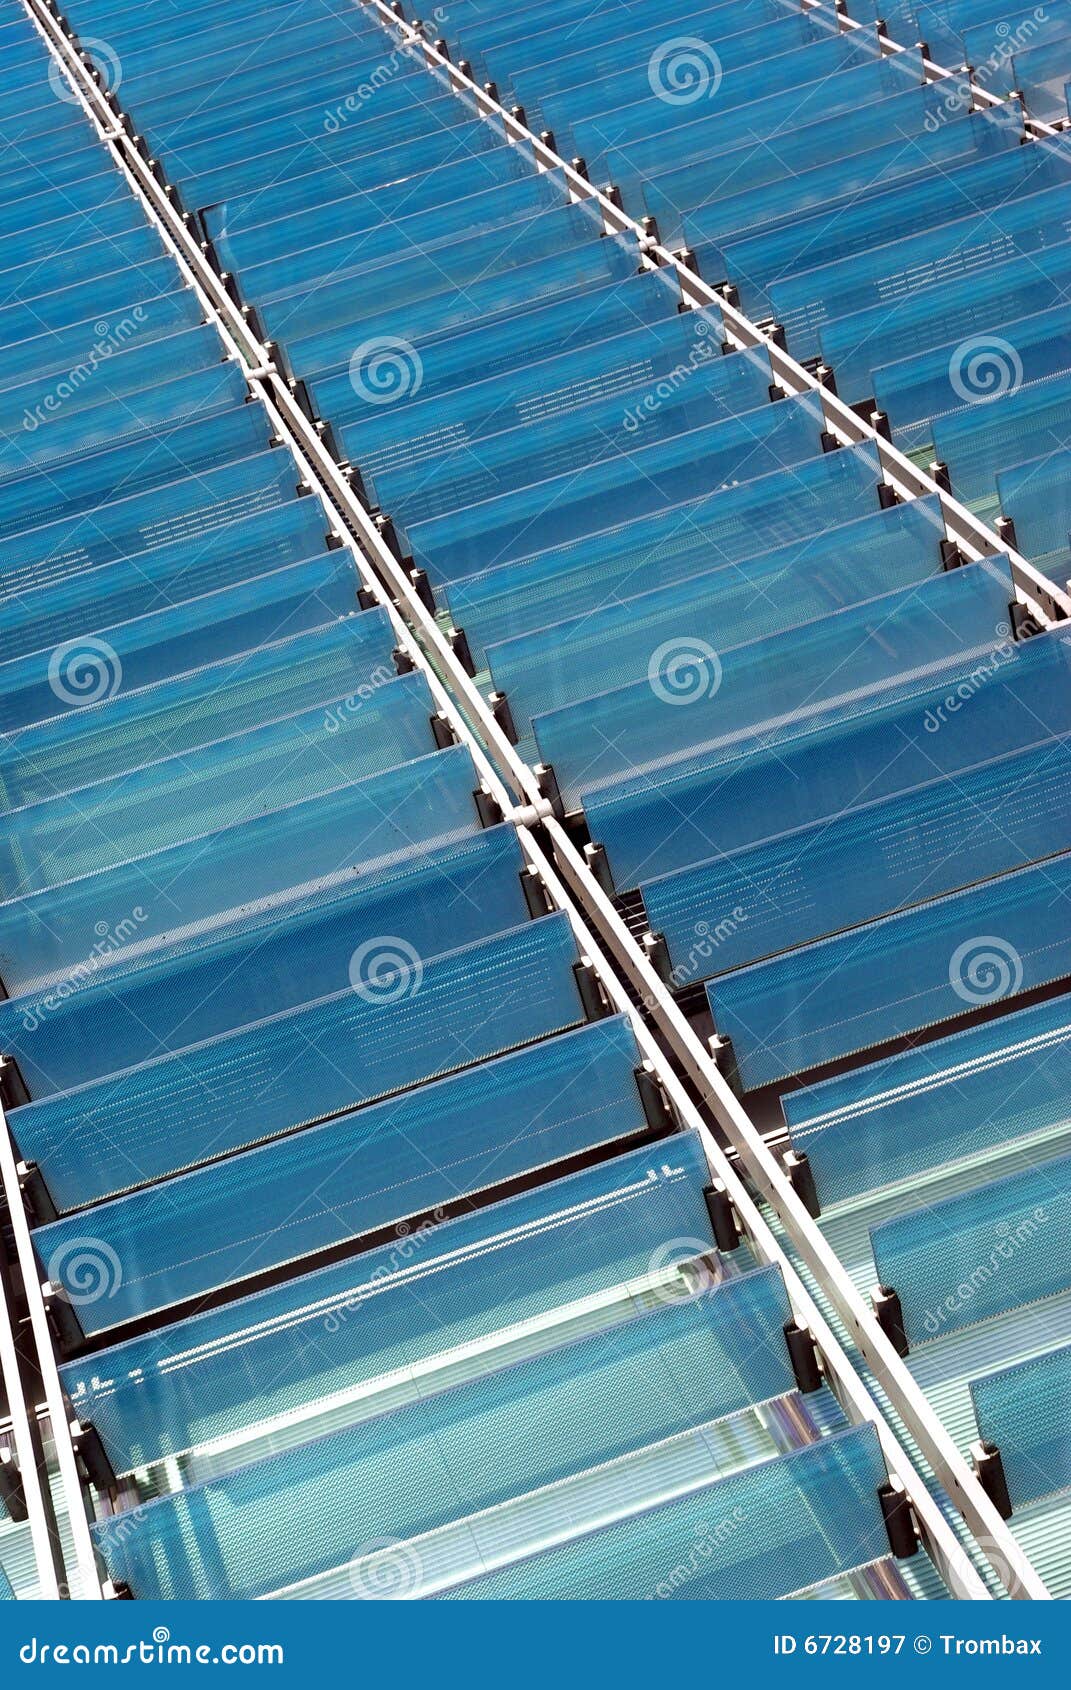 Glass sunshades 3 stock image. Image of front, device - 6728197